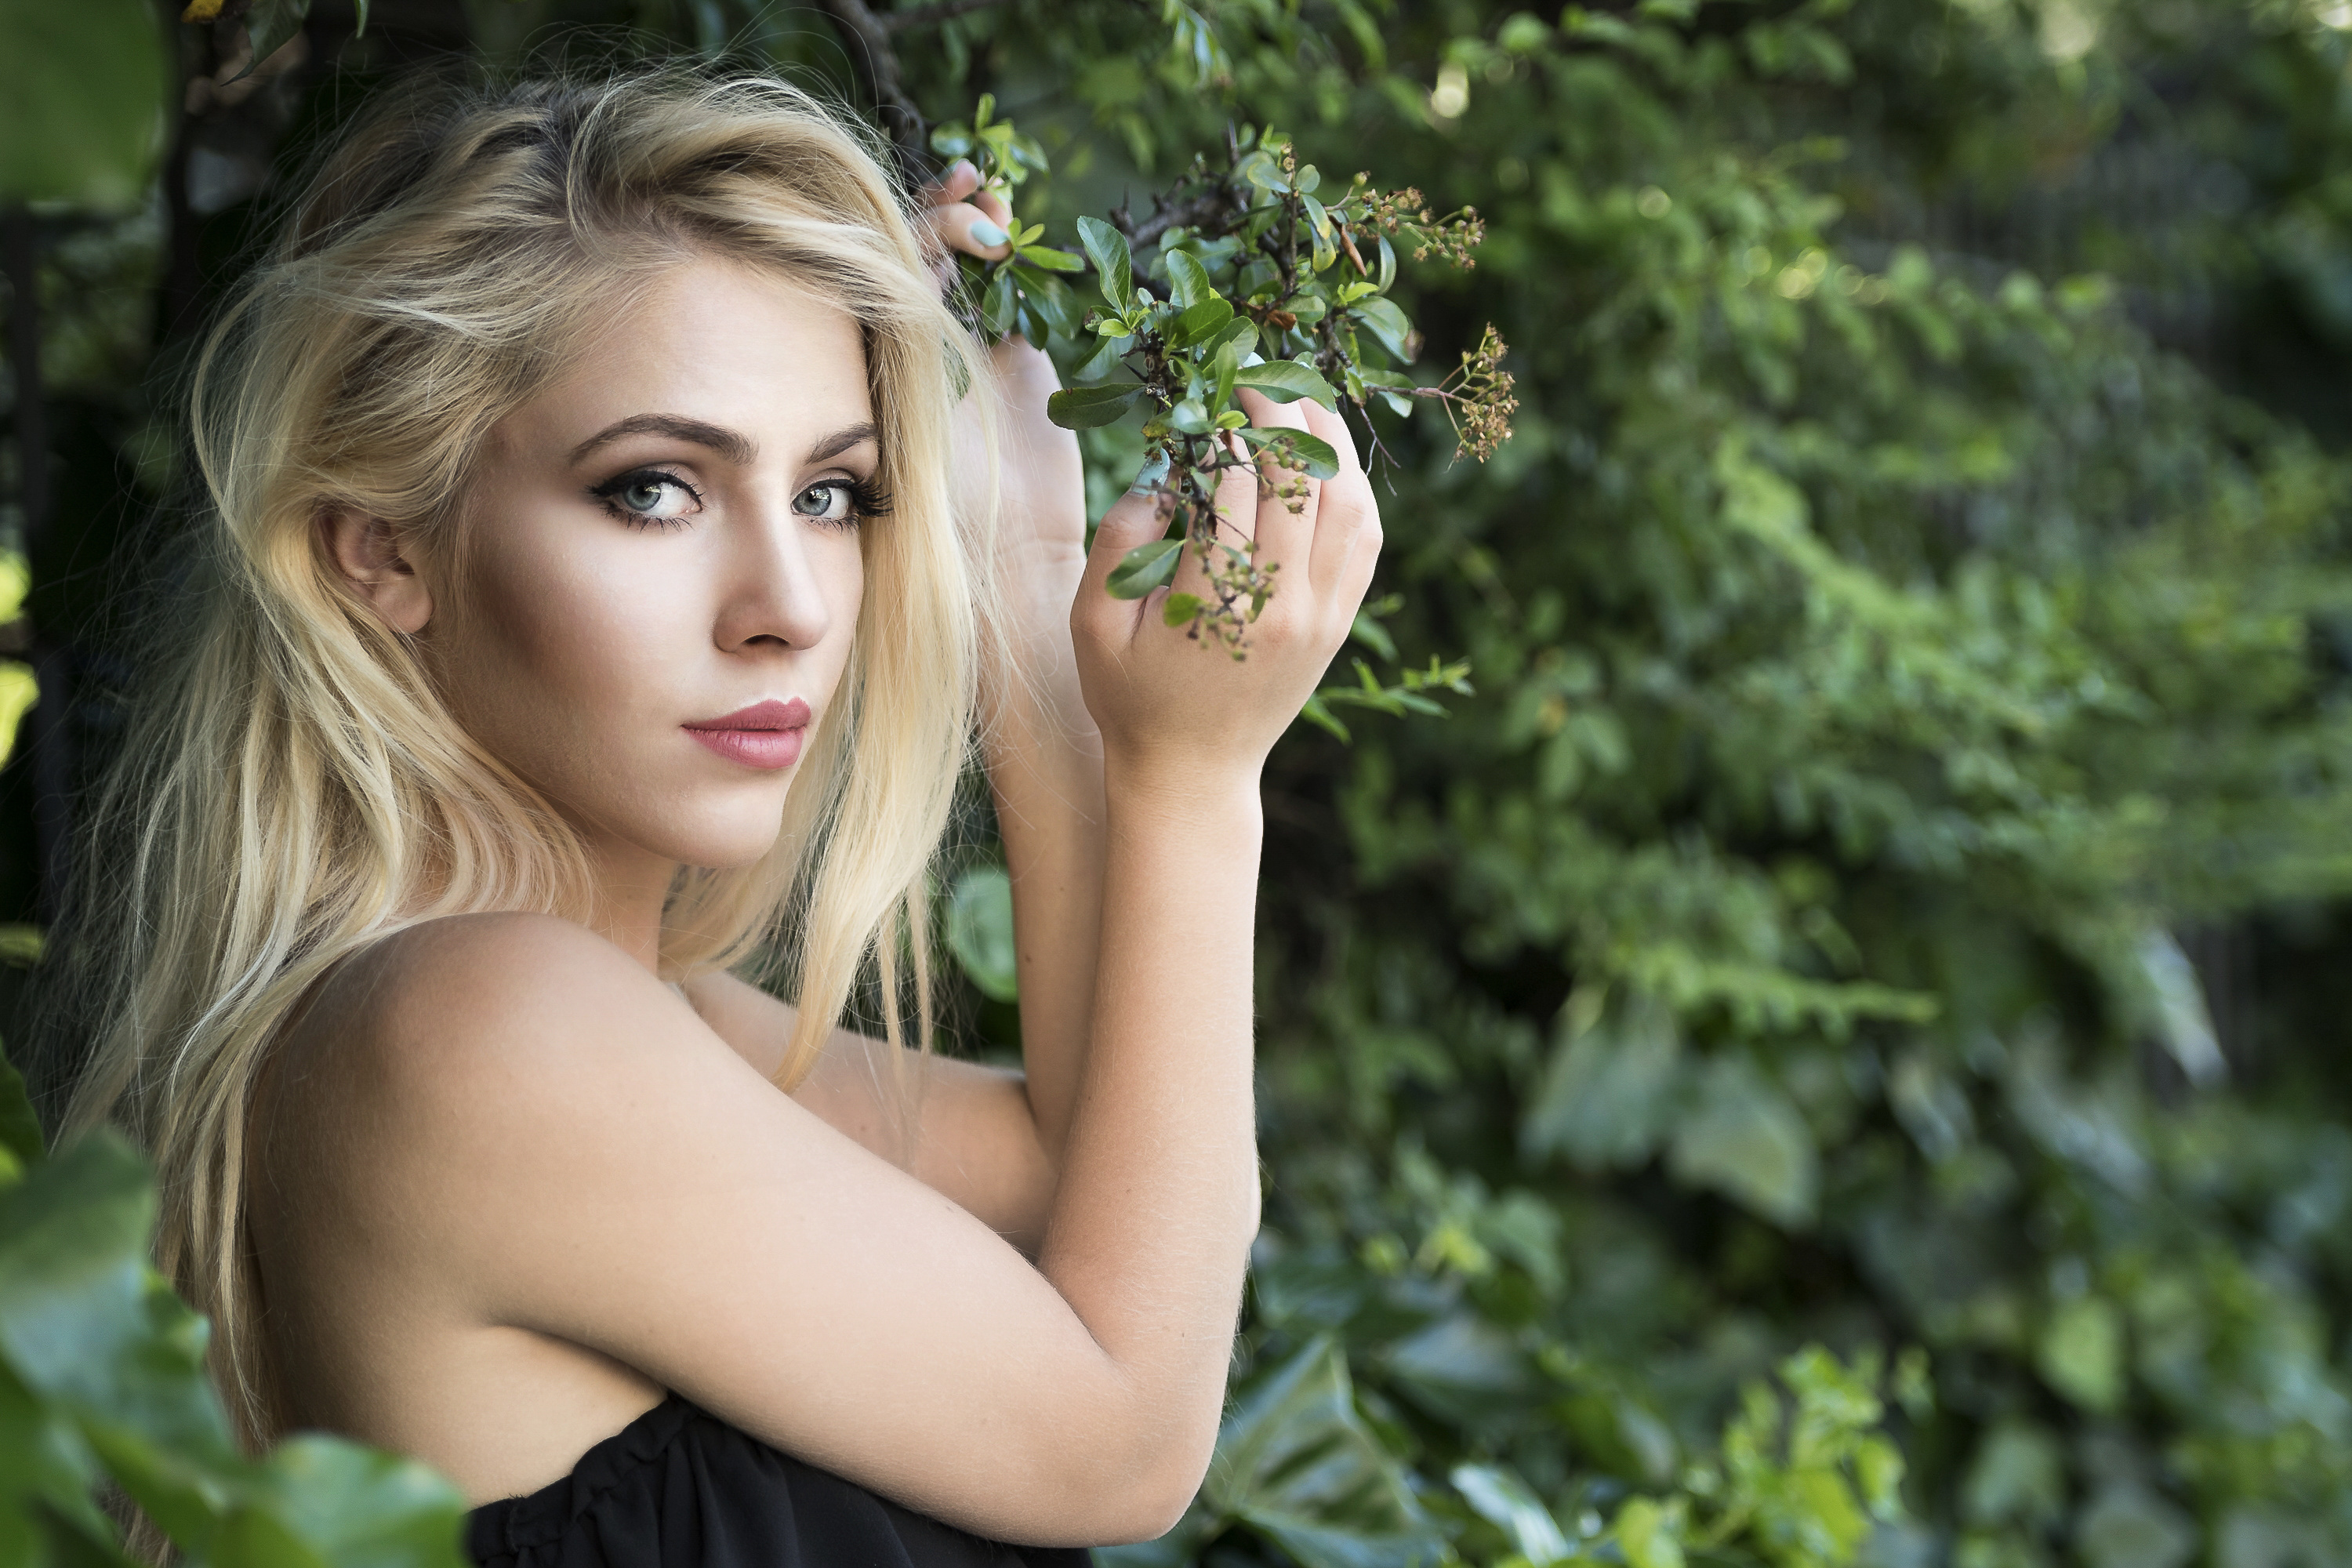 A blonde girl poses with a flower